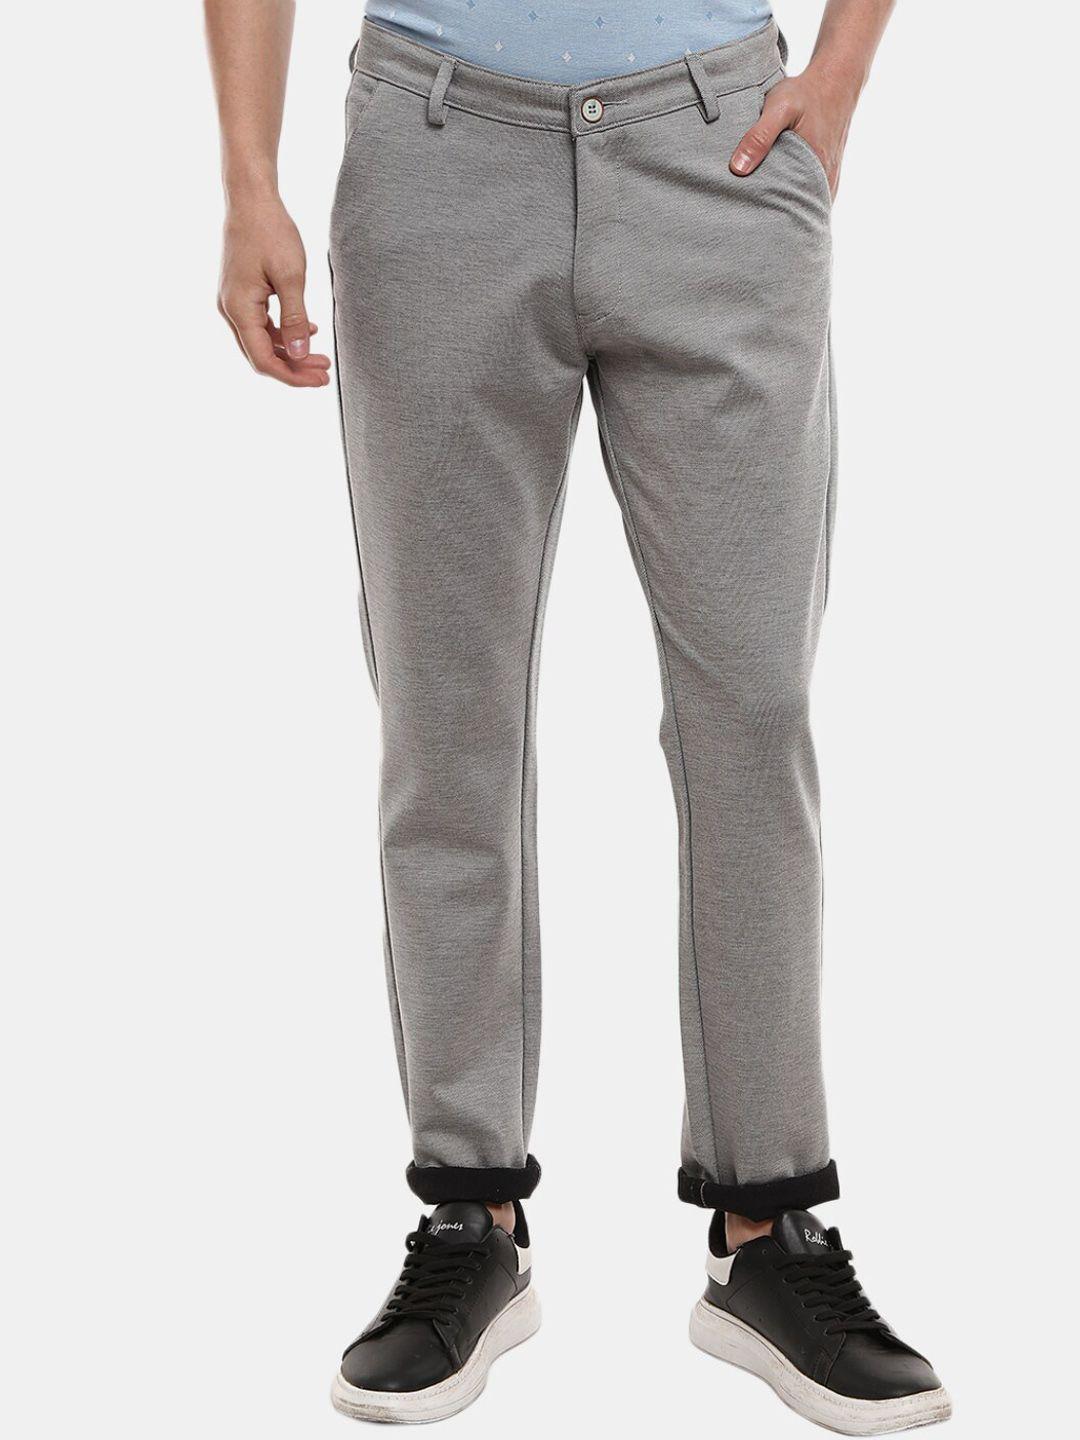 v-mart men grey classic slim fit chinos trousers